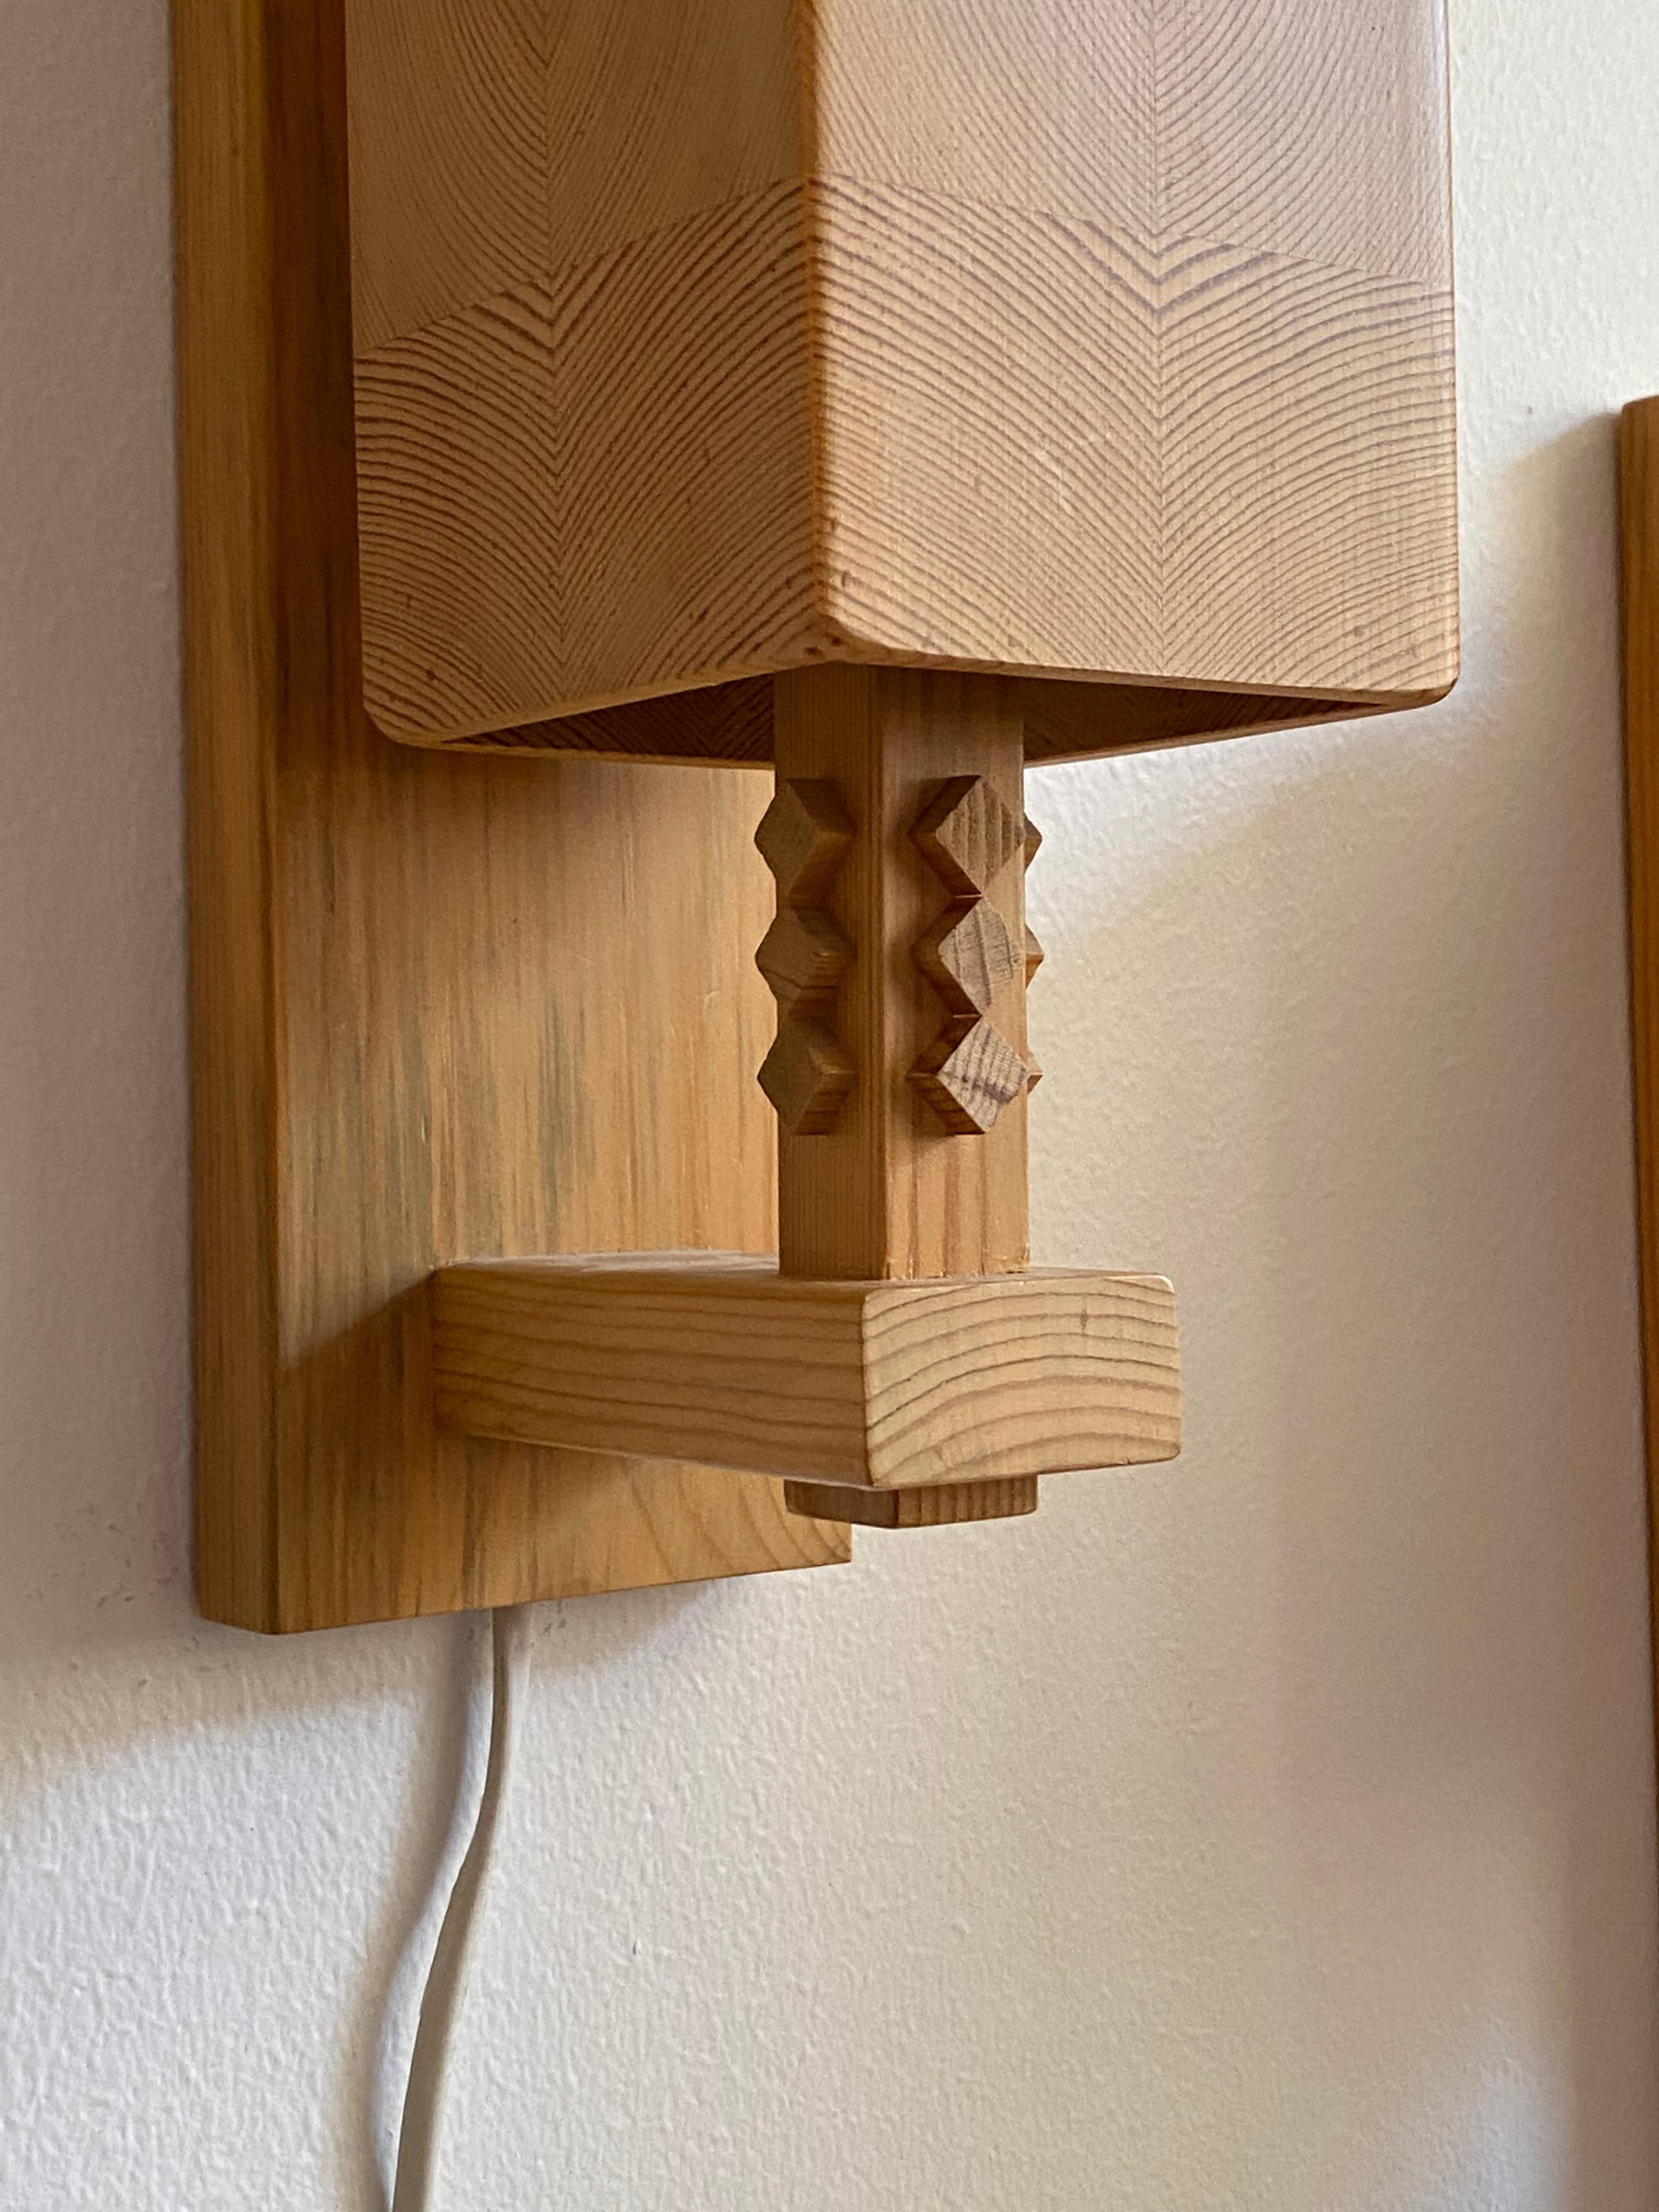 A pair of wall lights / wall sconces. Designed and produced by Leif Wikner, Persåsen Kövra, Sweden, c. 1970s. Stamped.

In solid pine. Features a minimal form and simple ornamentation.